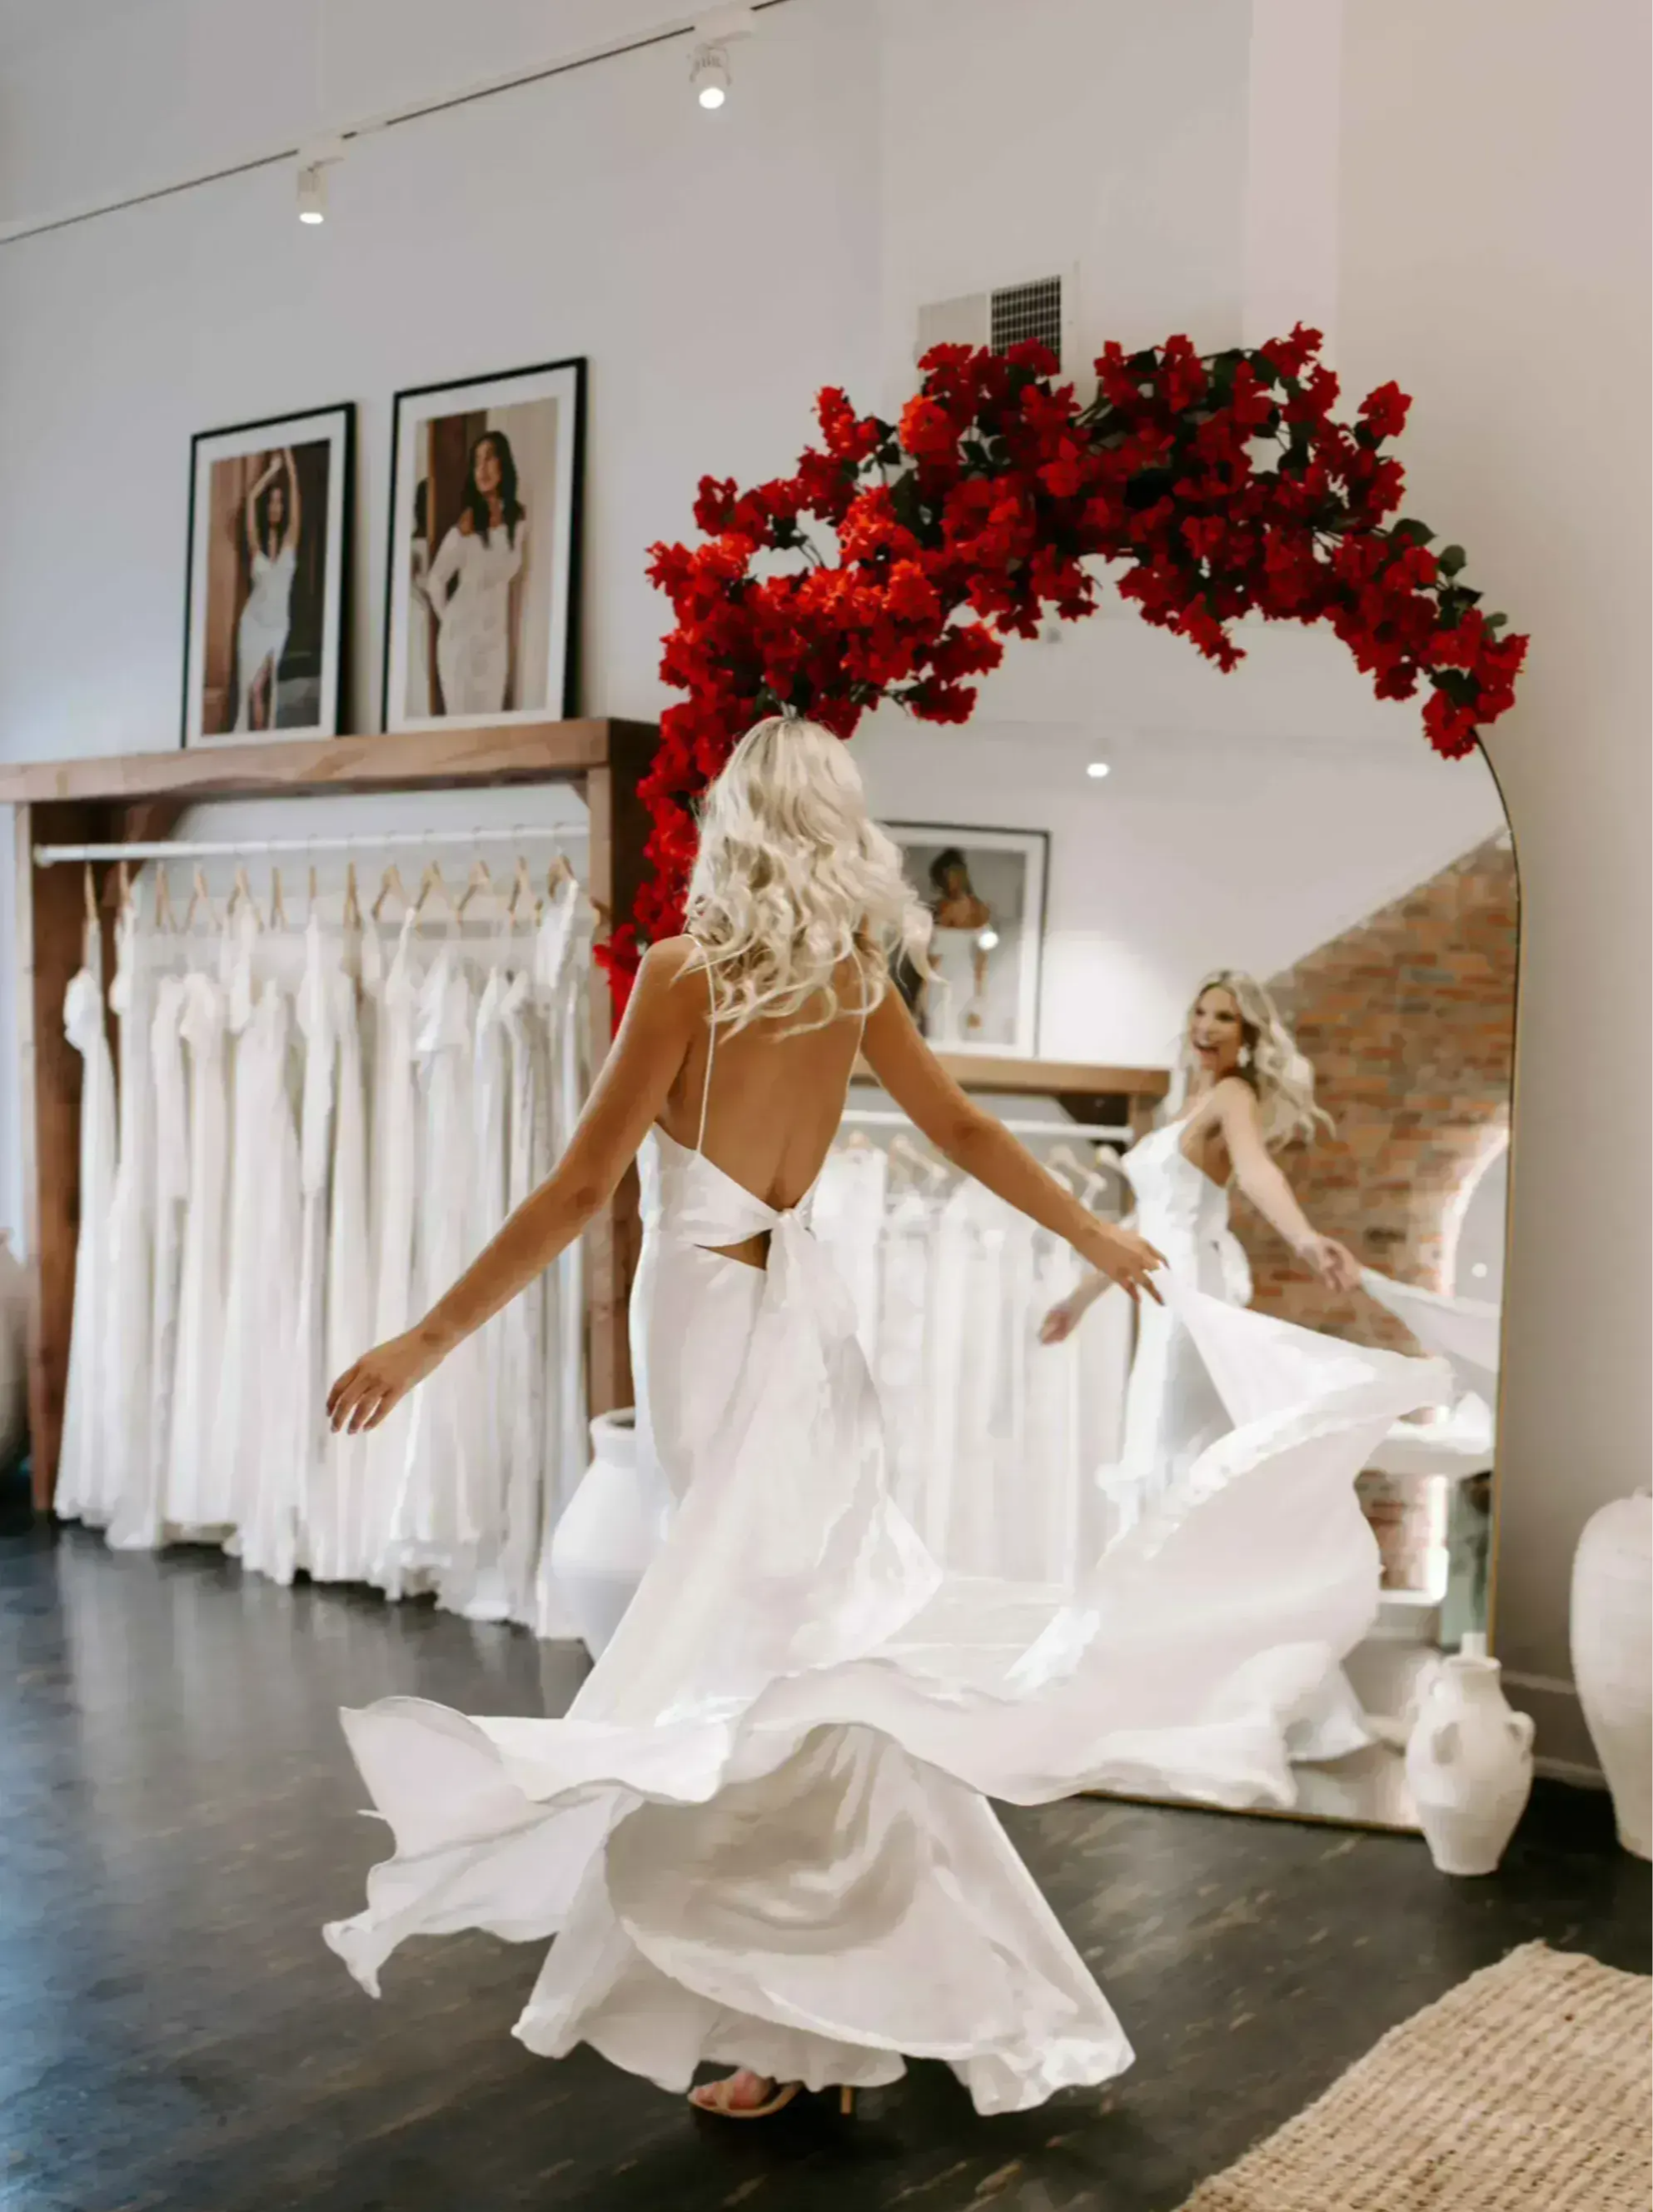 Bride twirling in front of mirror with featured red floral arrangement